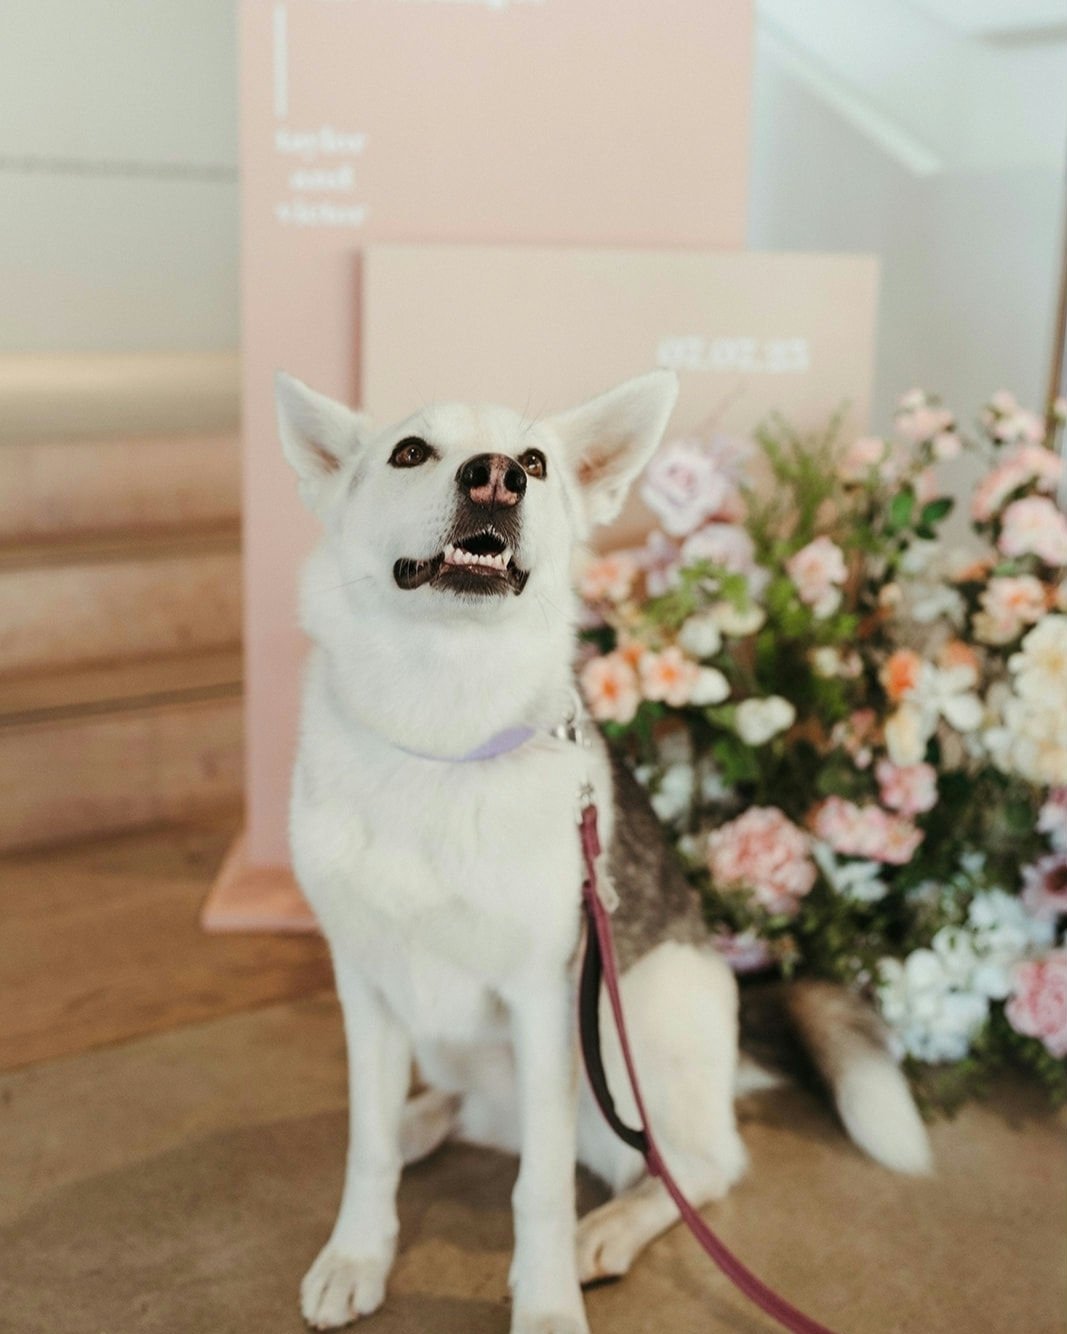 We love it when client's fur babies are also wedding VIP's!​​​​​​​​
..​​​​​​​​
A cute snap from T &amp; V's beautiful day.​​​​​​​​
..​​​​​​​​
Clients @yogini.taylor @vjcpang​​​​​​​​
Planner @thistleandthorneweddings @destinye.thistleandthorne ​​​​​​​